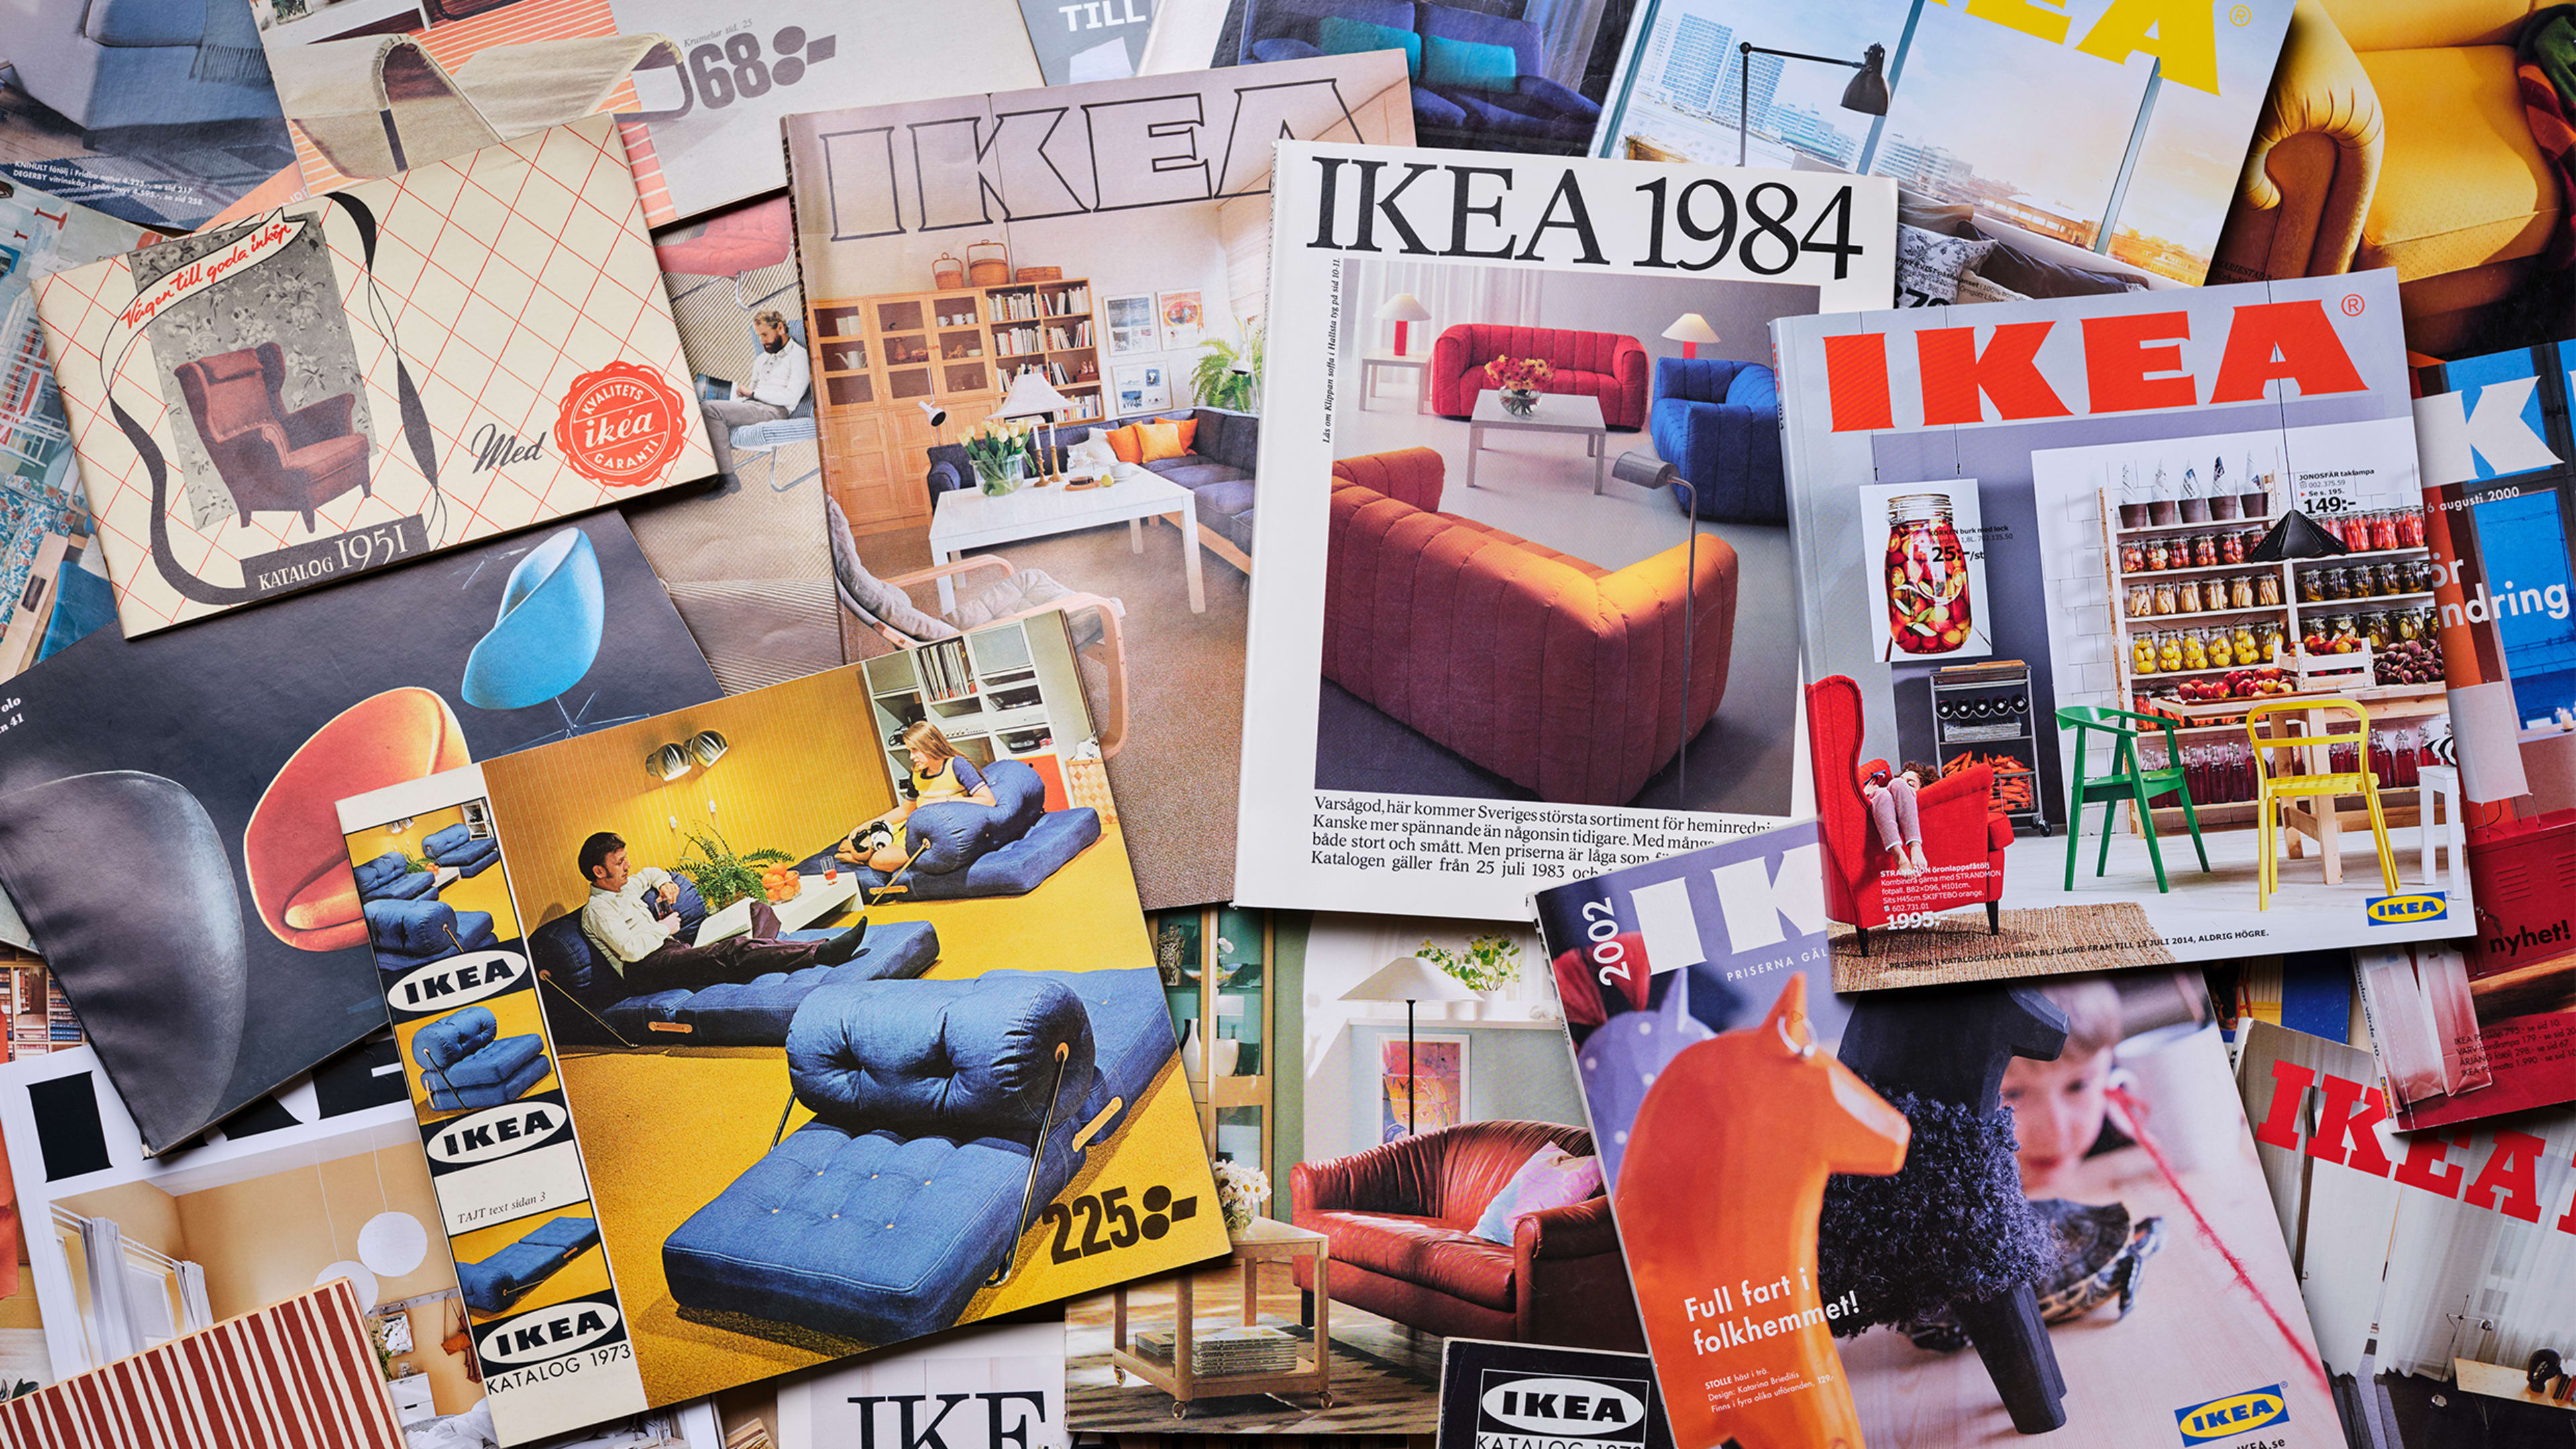 After 70 years, Ikea will stop making its beloved catalog